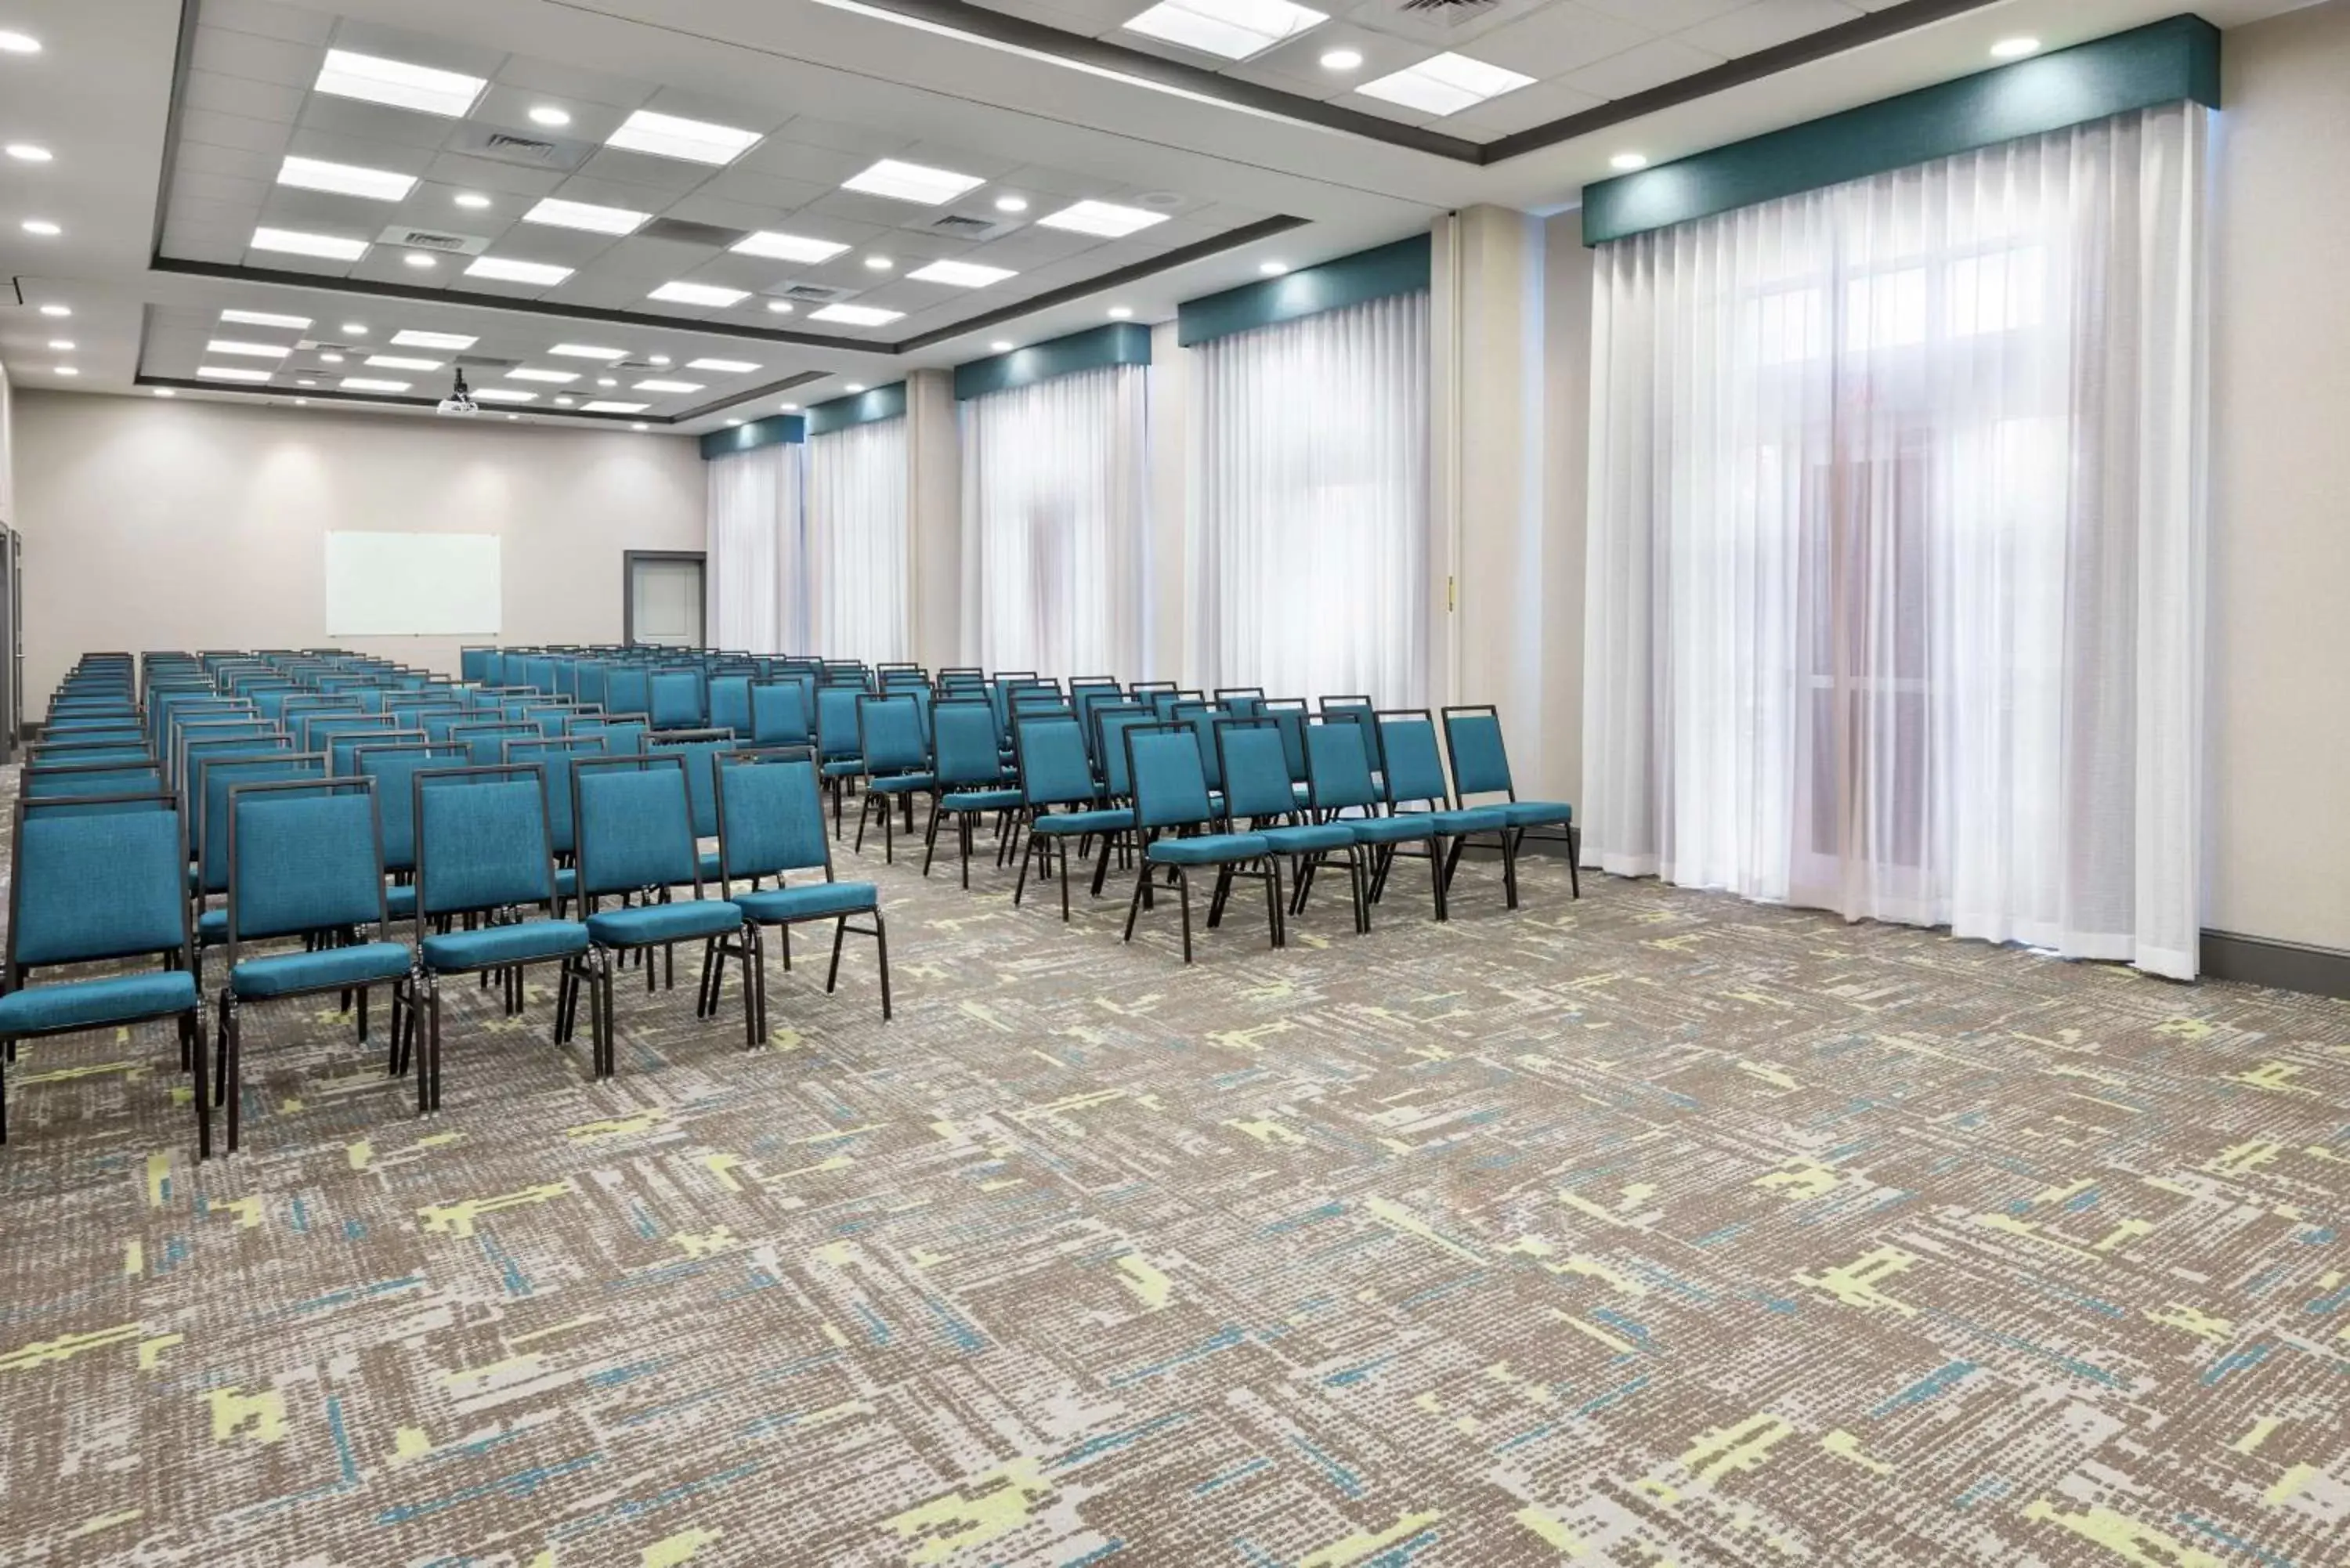 Meeting/conference room in Hampton Inn & Suites Orlando Airport at Gateway Village